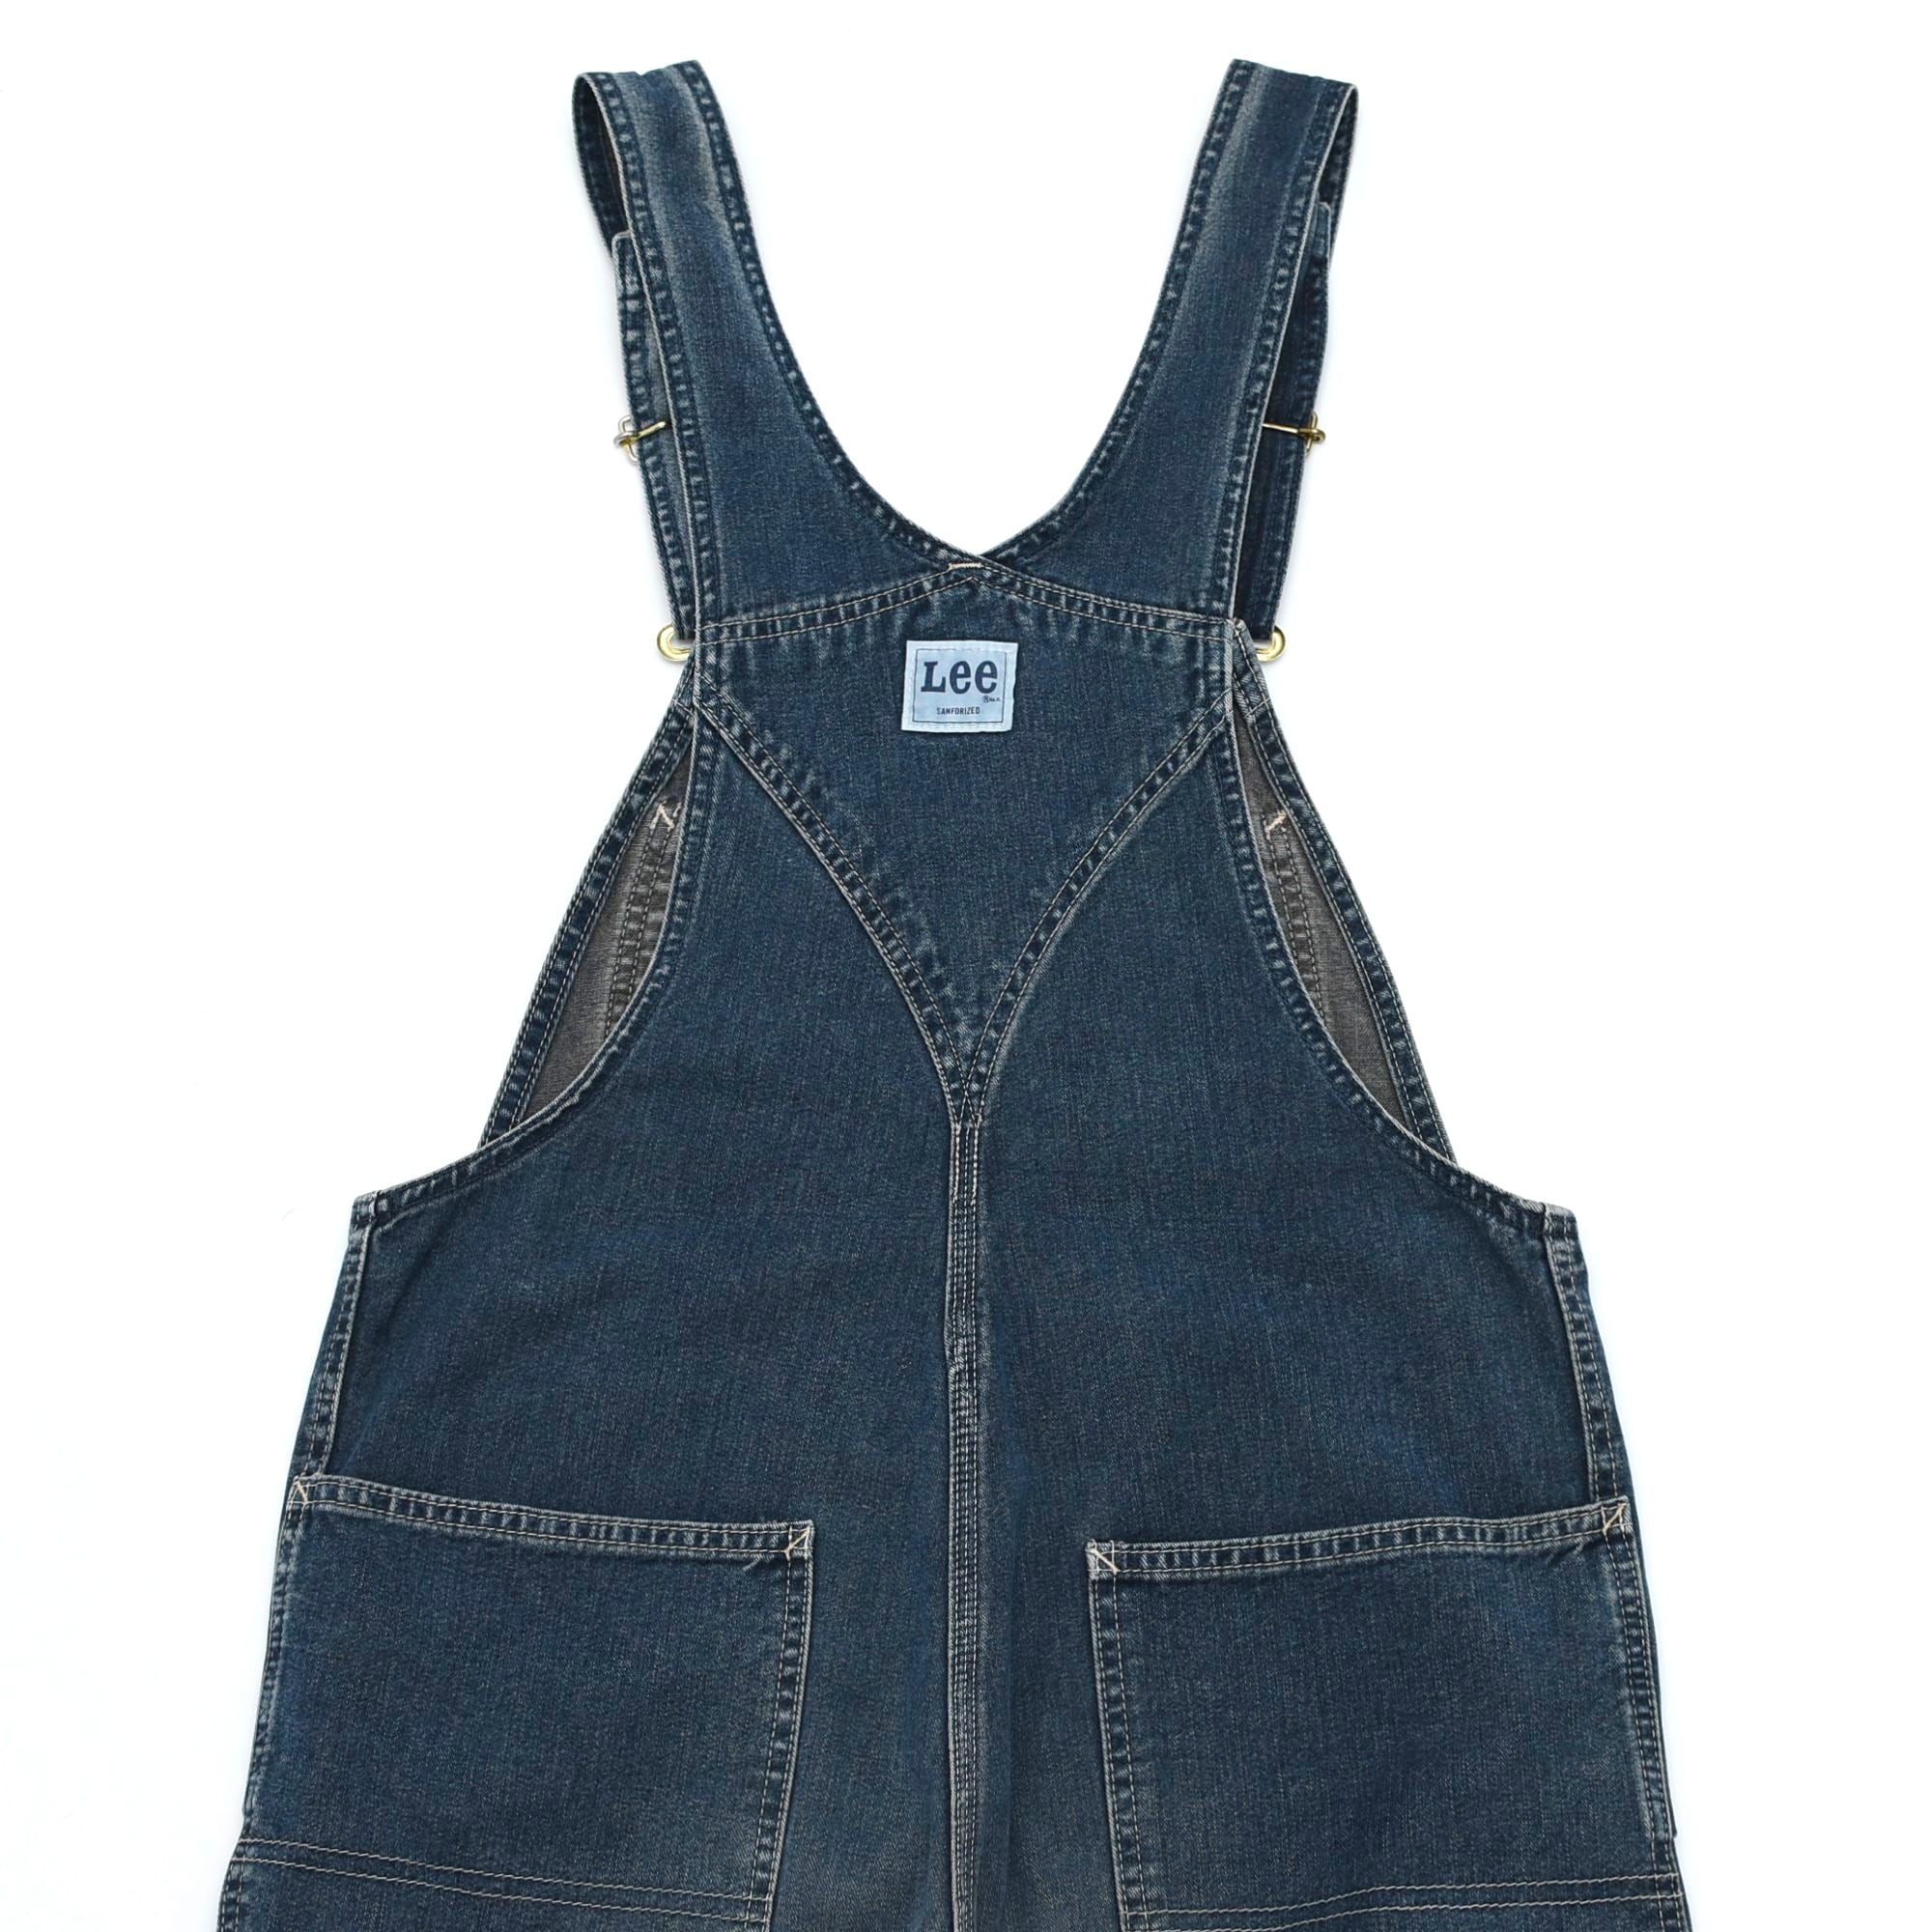 Lee denim overalls Made in JAPAN by EDWIN | 古着屋 grin days